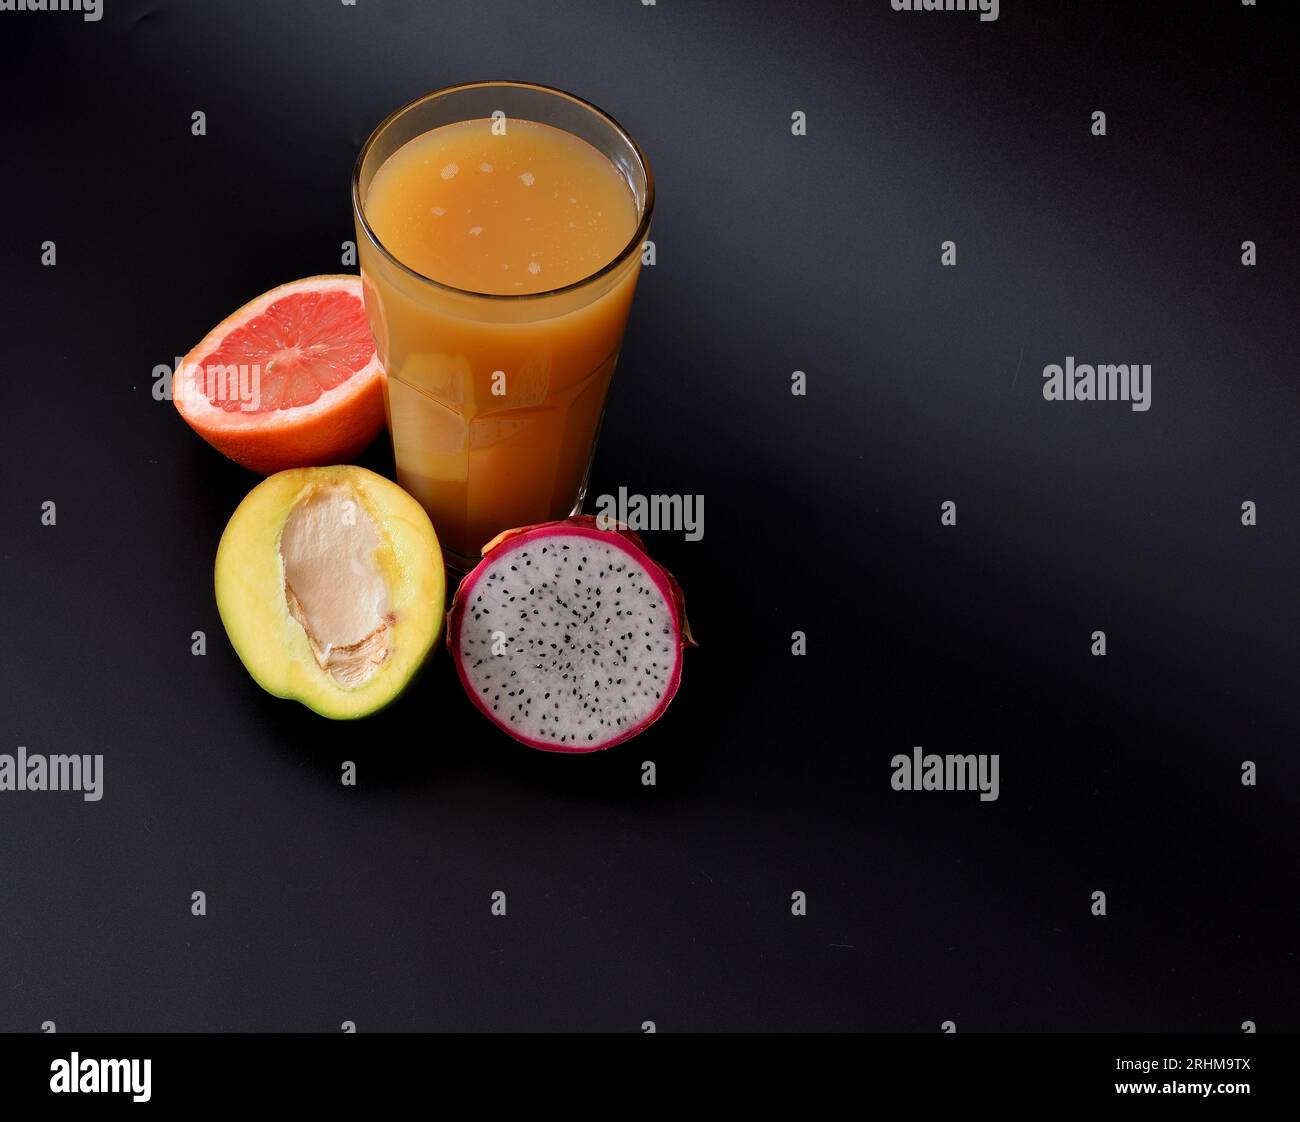 A tall glass of freshly squeezed fruit juice on a black background, next to half a ripe mango, grapefruit and pitaya. Close-up. Stock Photo